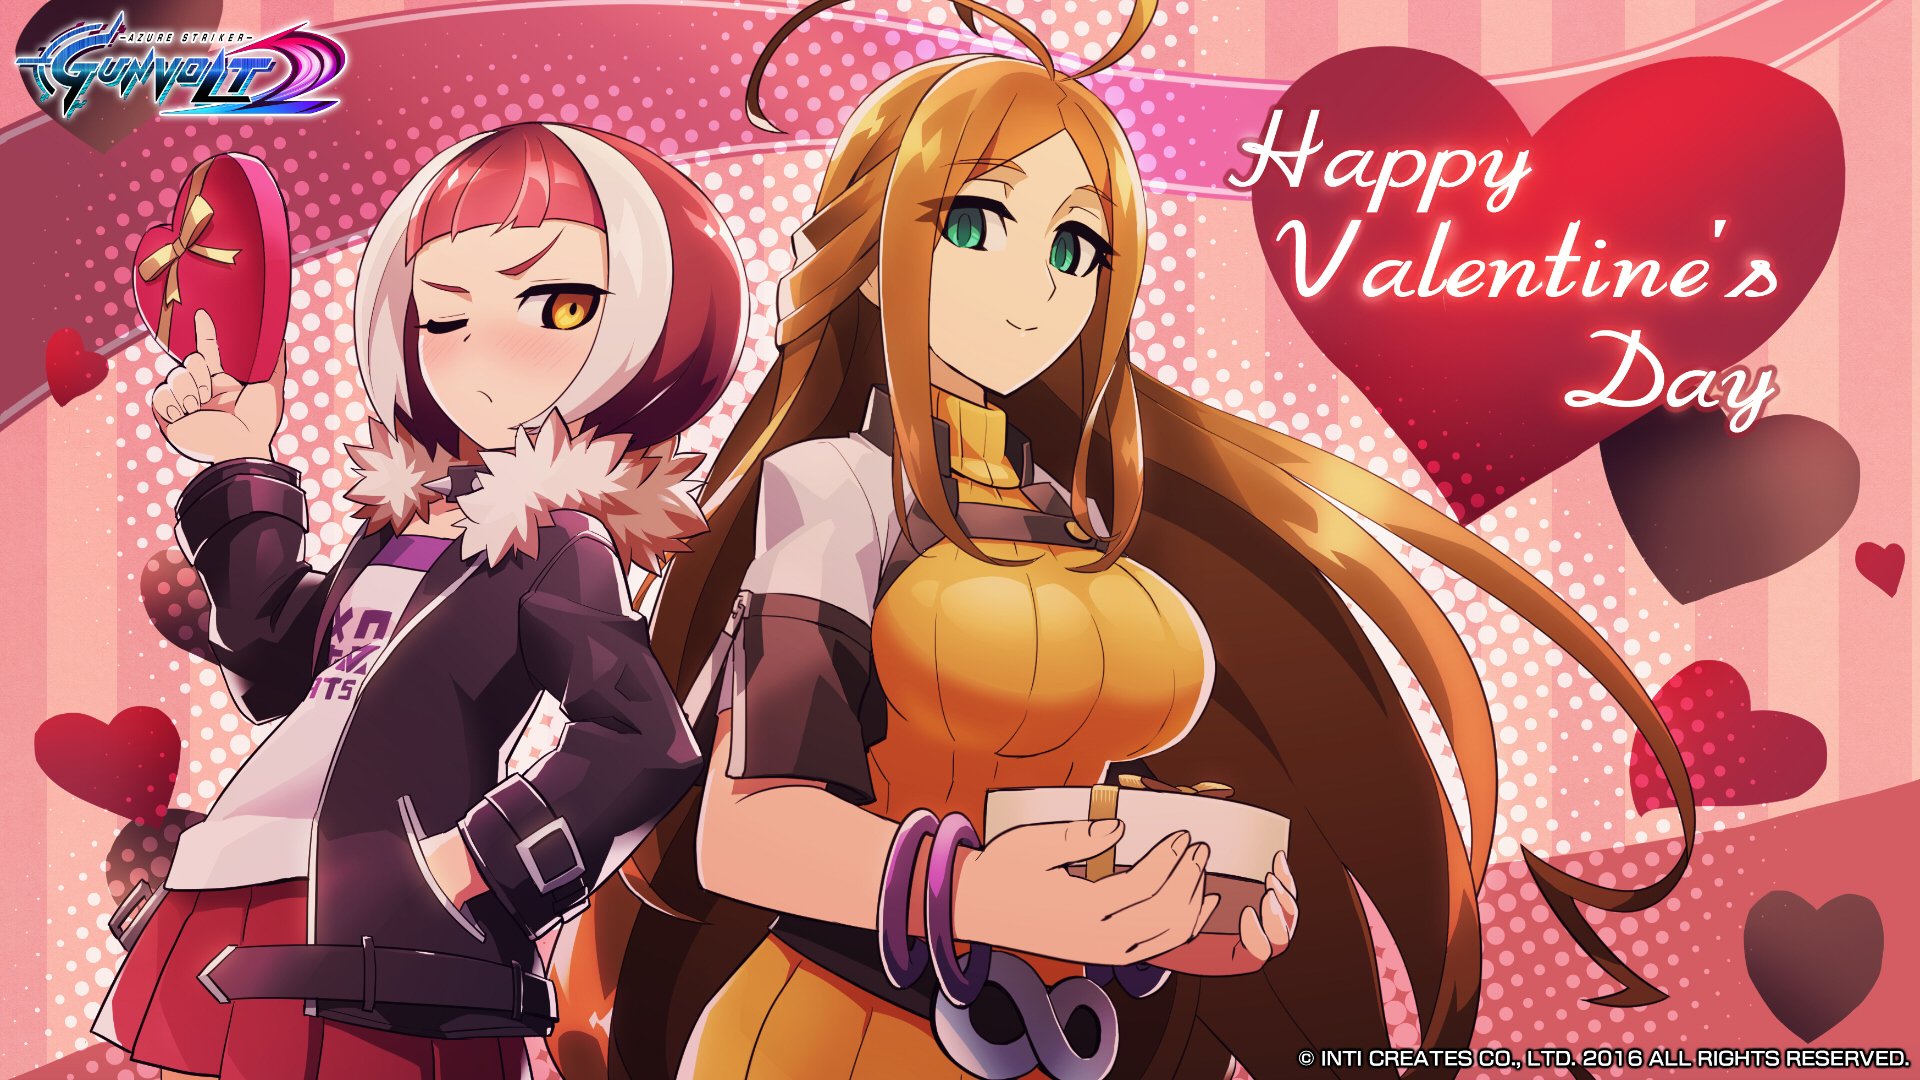 INTI CREATES Valentine's Day, Strikers! :D We have a lovely new Gunvolt wallpaper for you guys featuring Gibril and Desna!